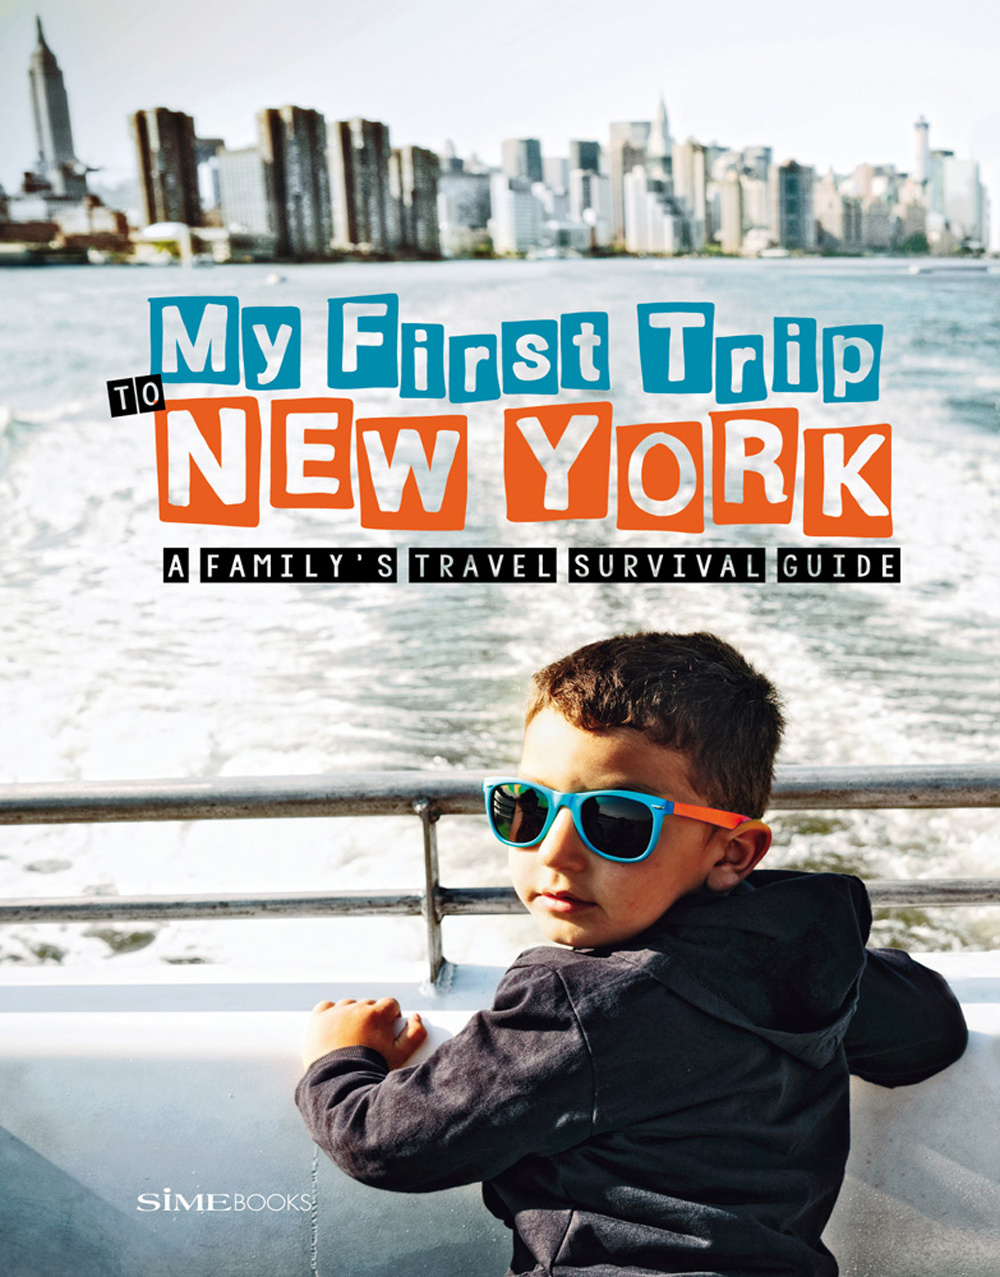 My first trip to New York. A family's travel survival guide